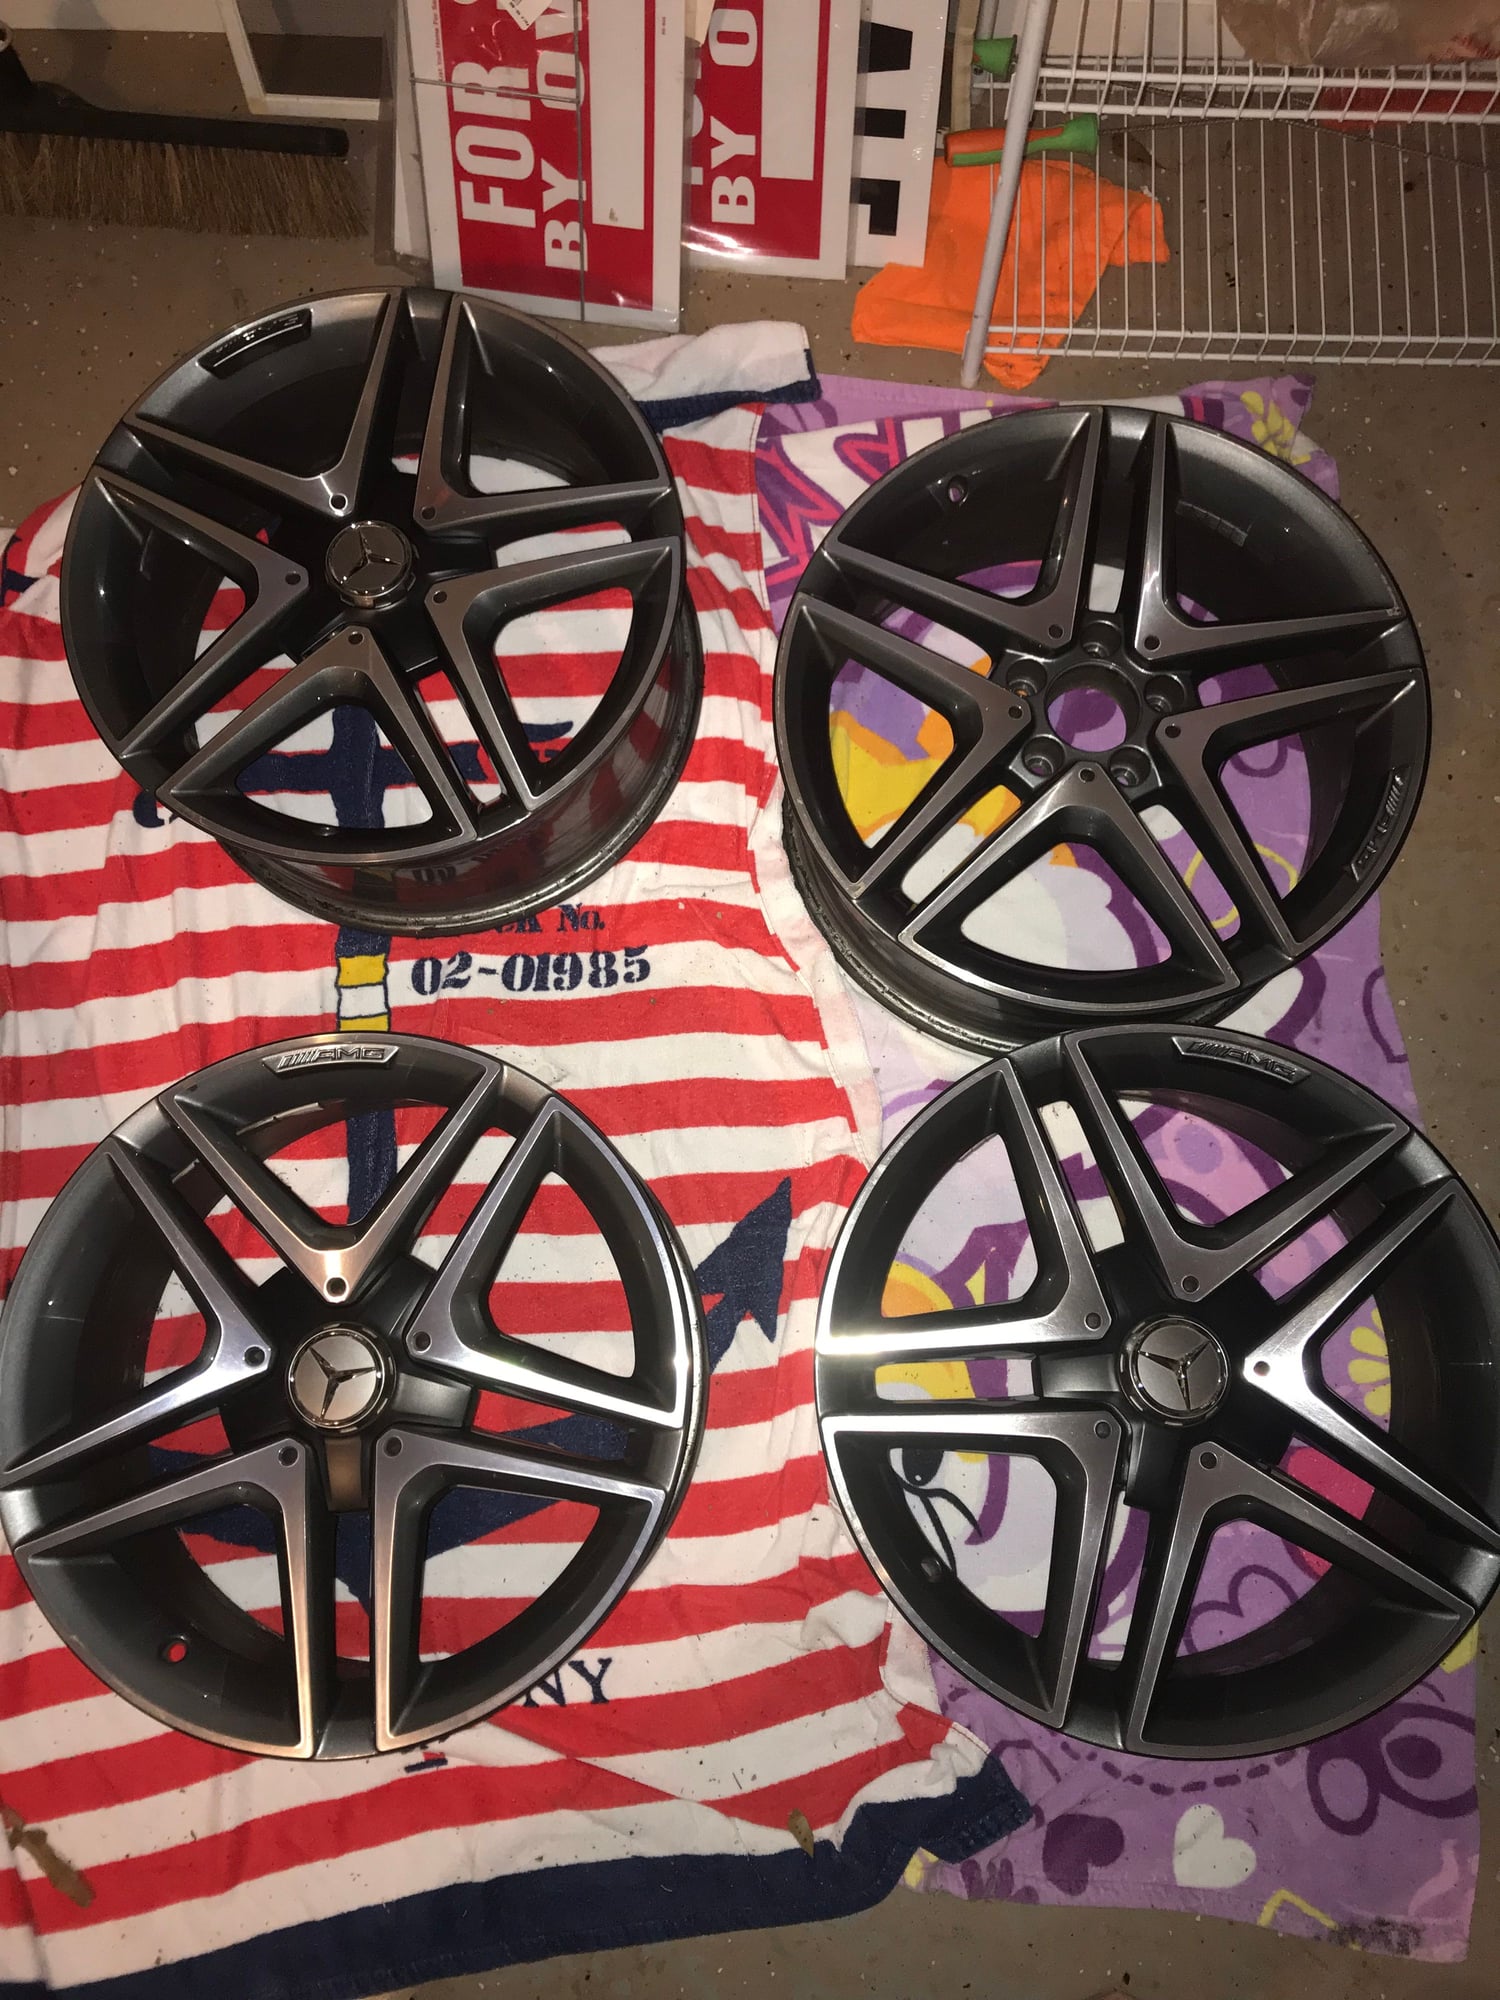 Wheels and Tires/Axles - 18" AMG rims for sale. Very good condition - Used - All Years Mercedes-Benz All Models - Atlanta, GA 30305, United States